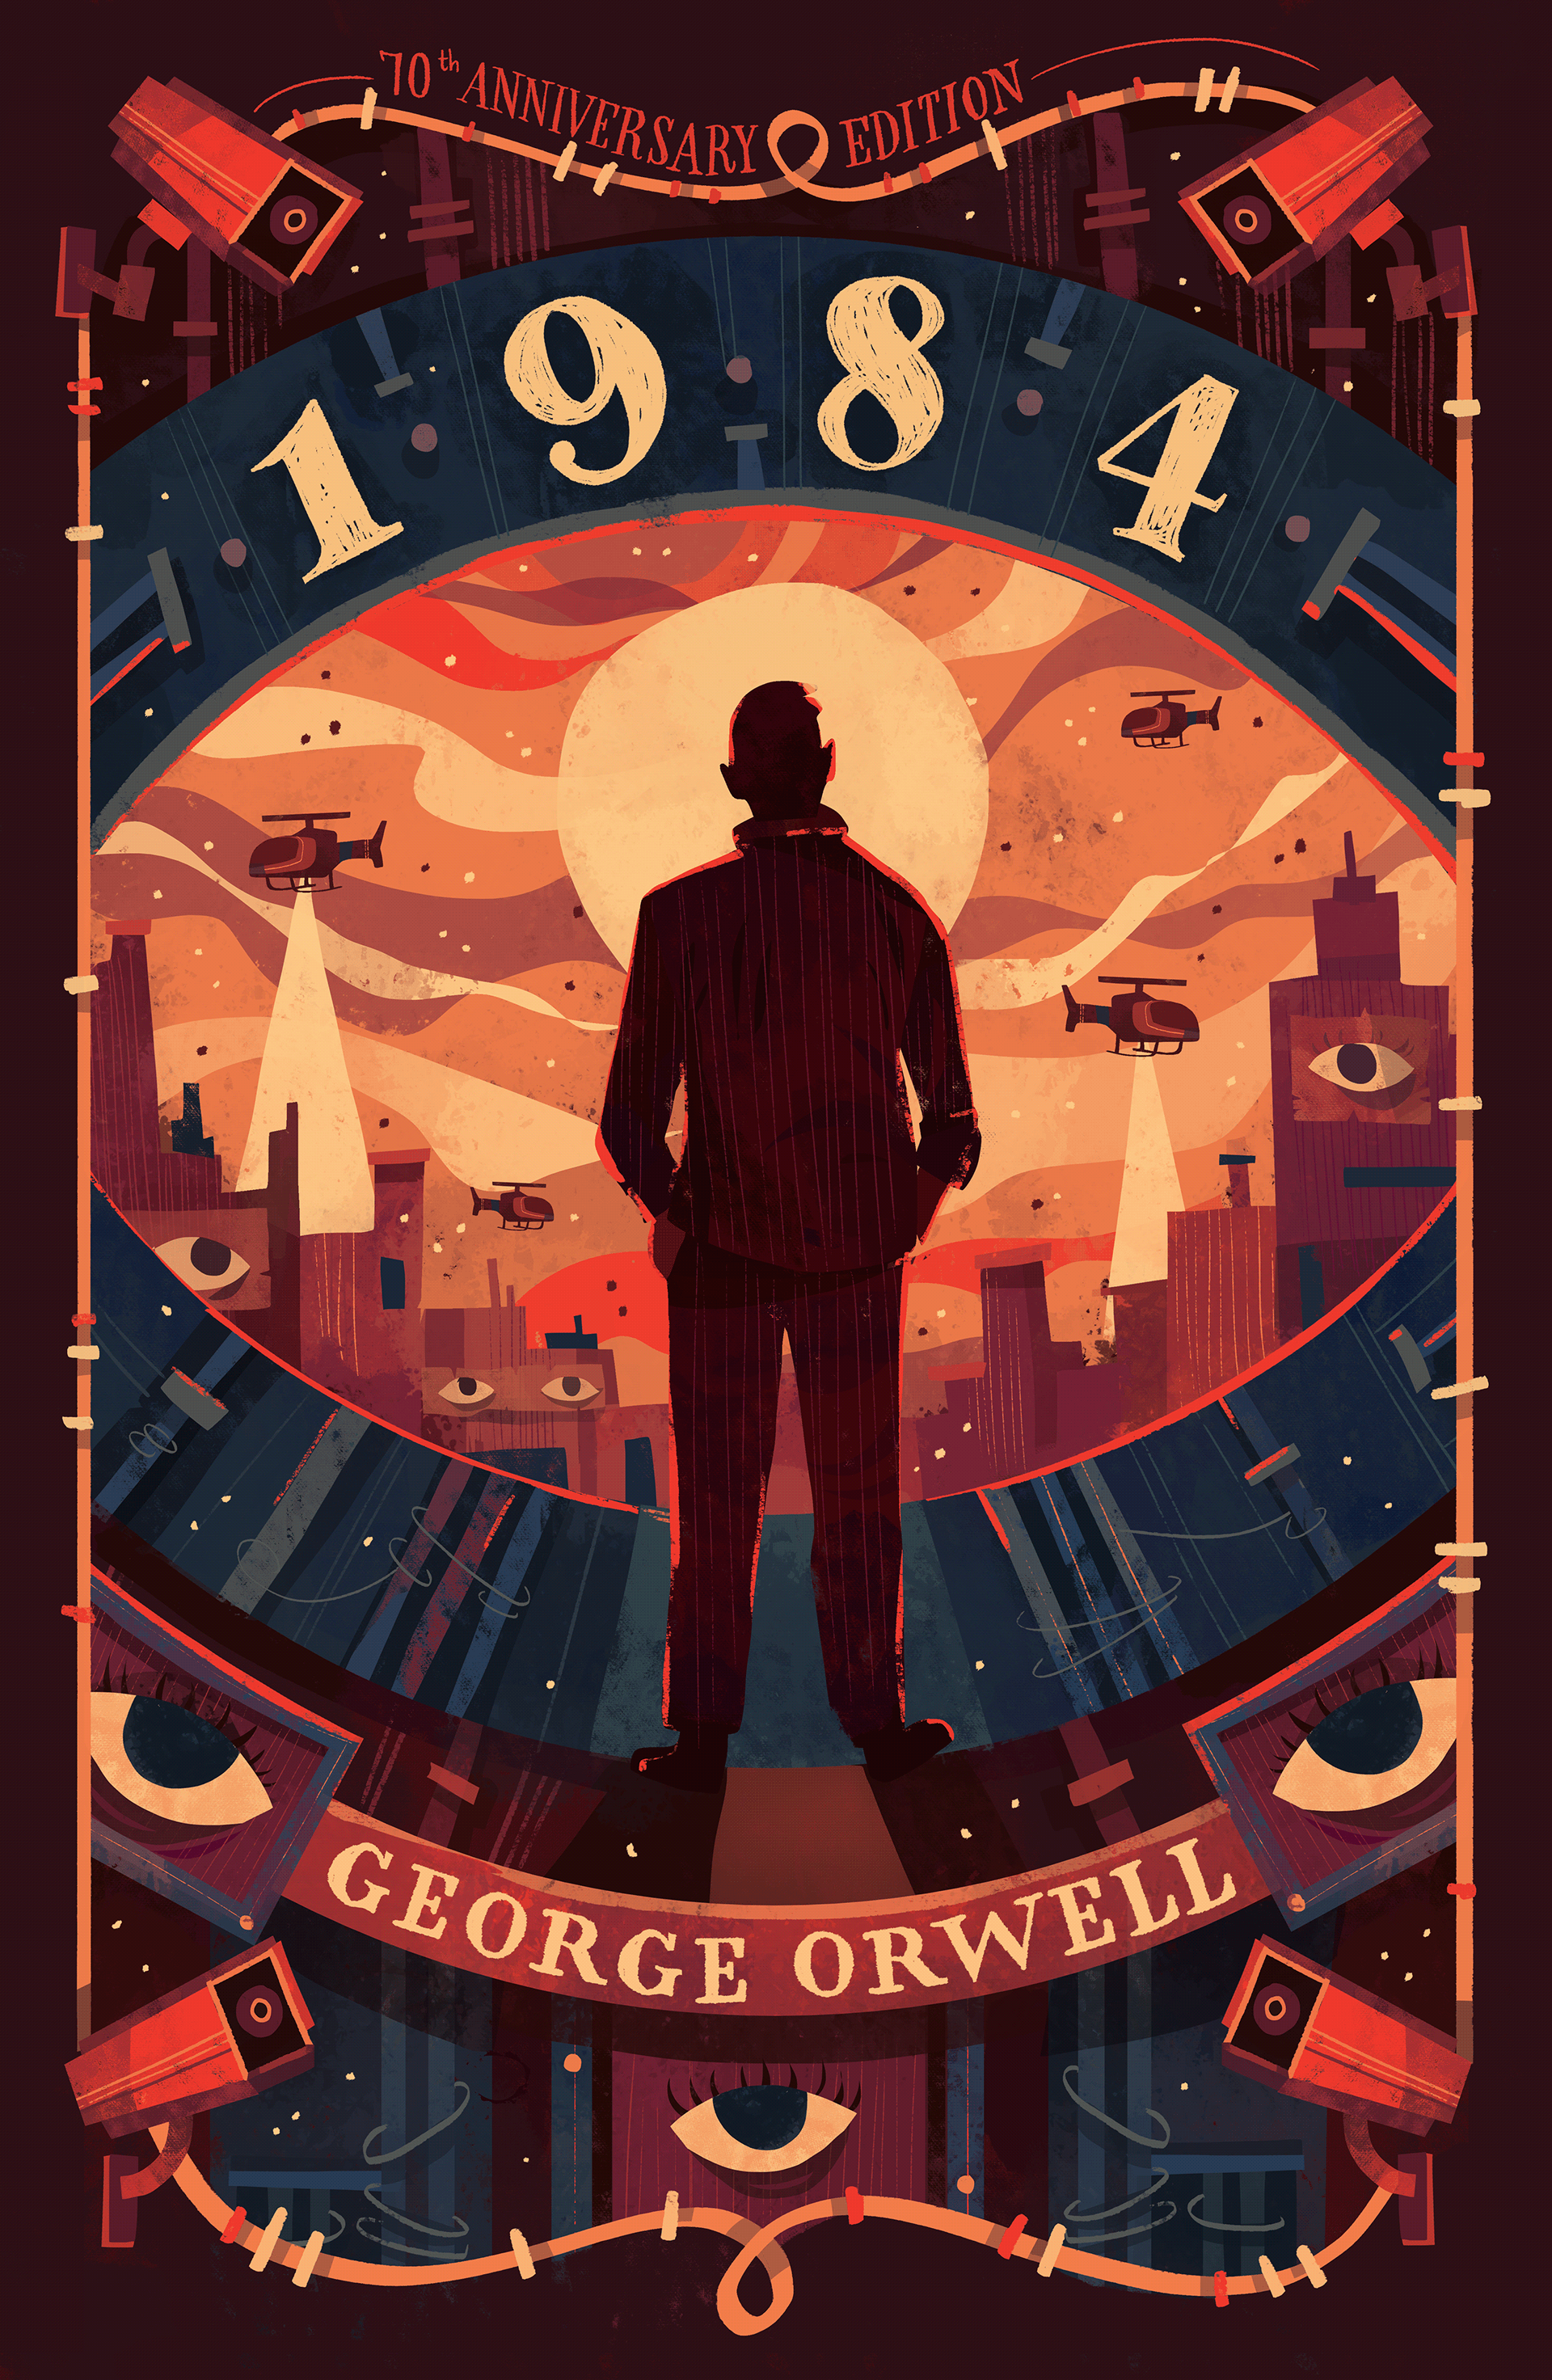 1984 by George Orwell Book Cover